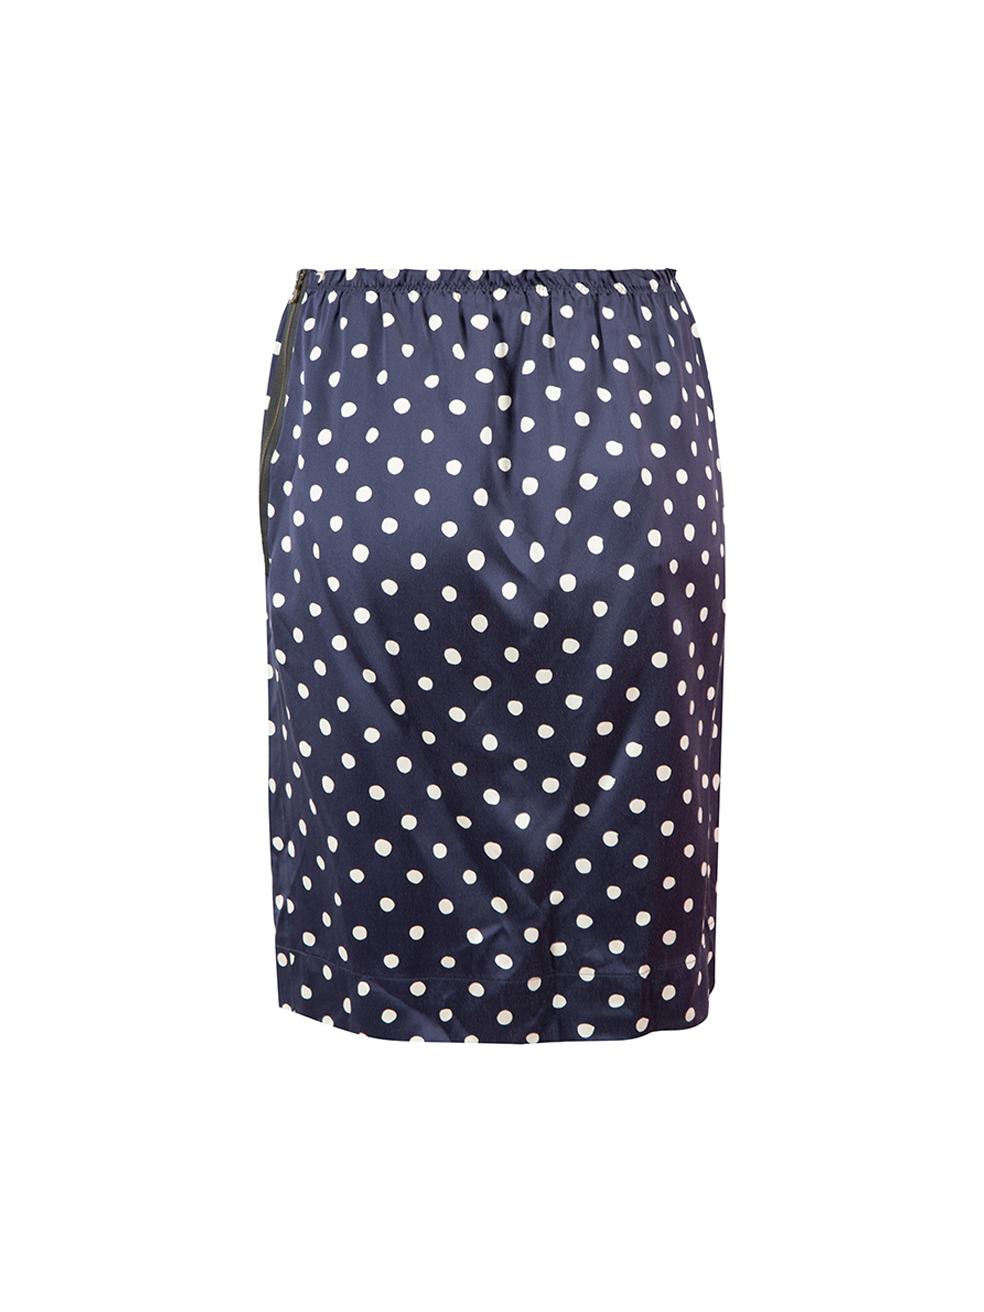 Navy Polkadot Pattern Mini Skirt Size S In New Condition For Sale In London, GB